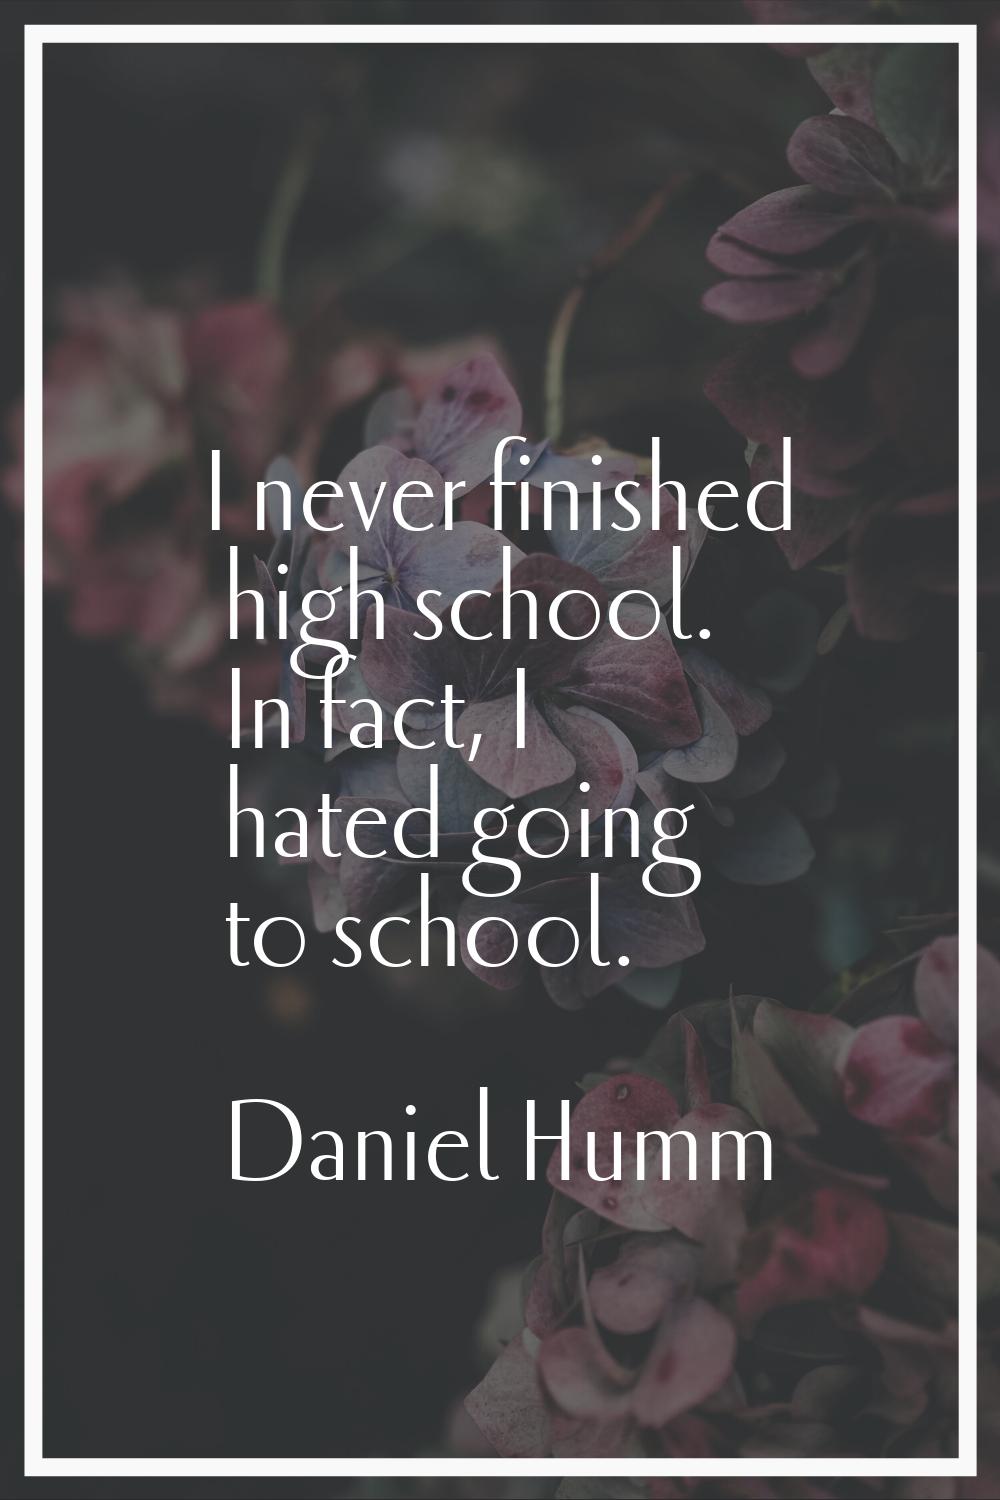 I never finished high school. In fact, I hated going to school.